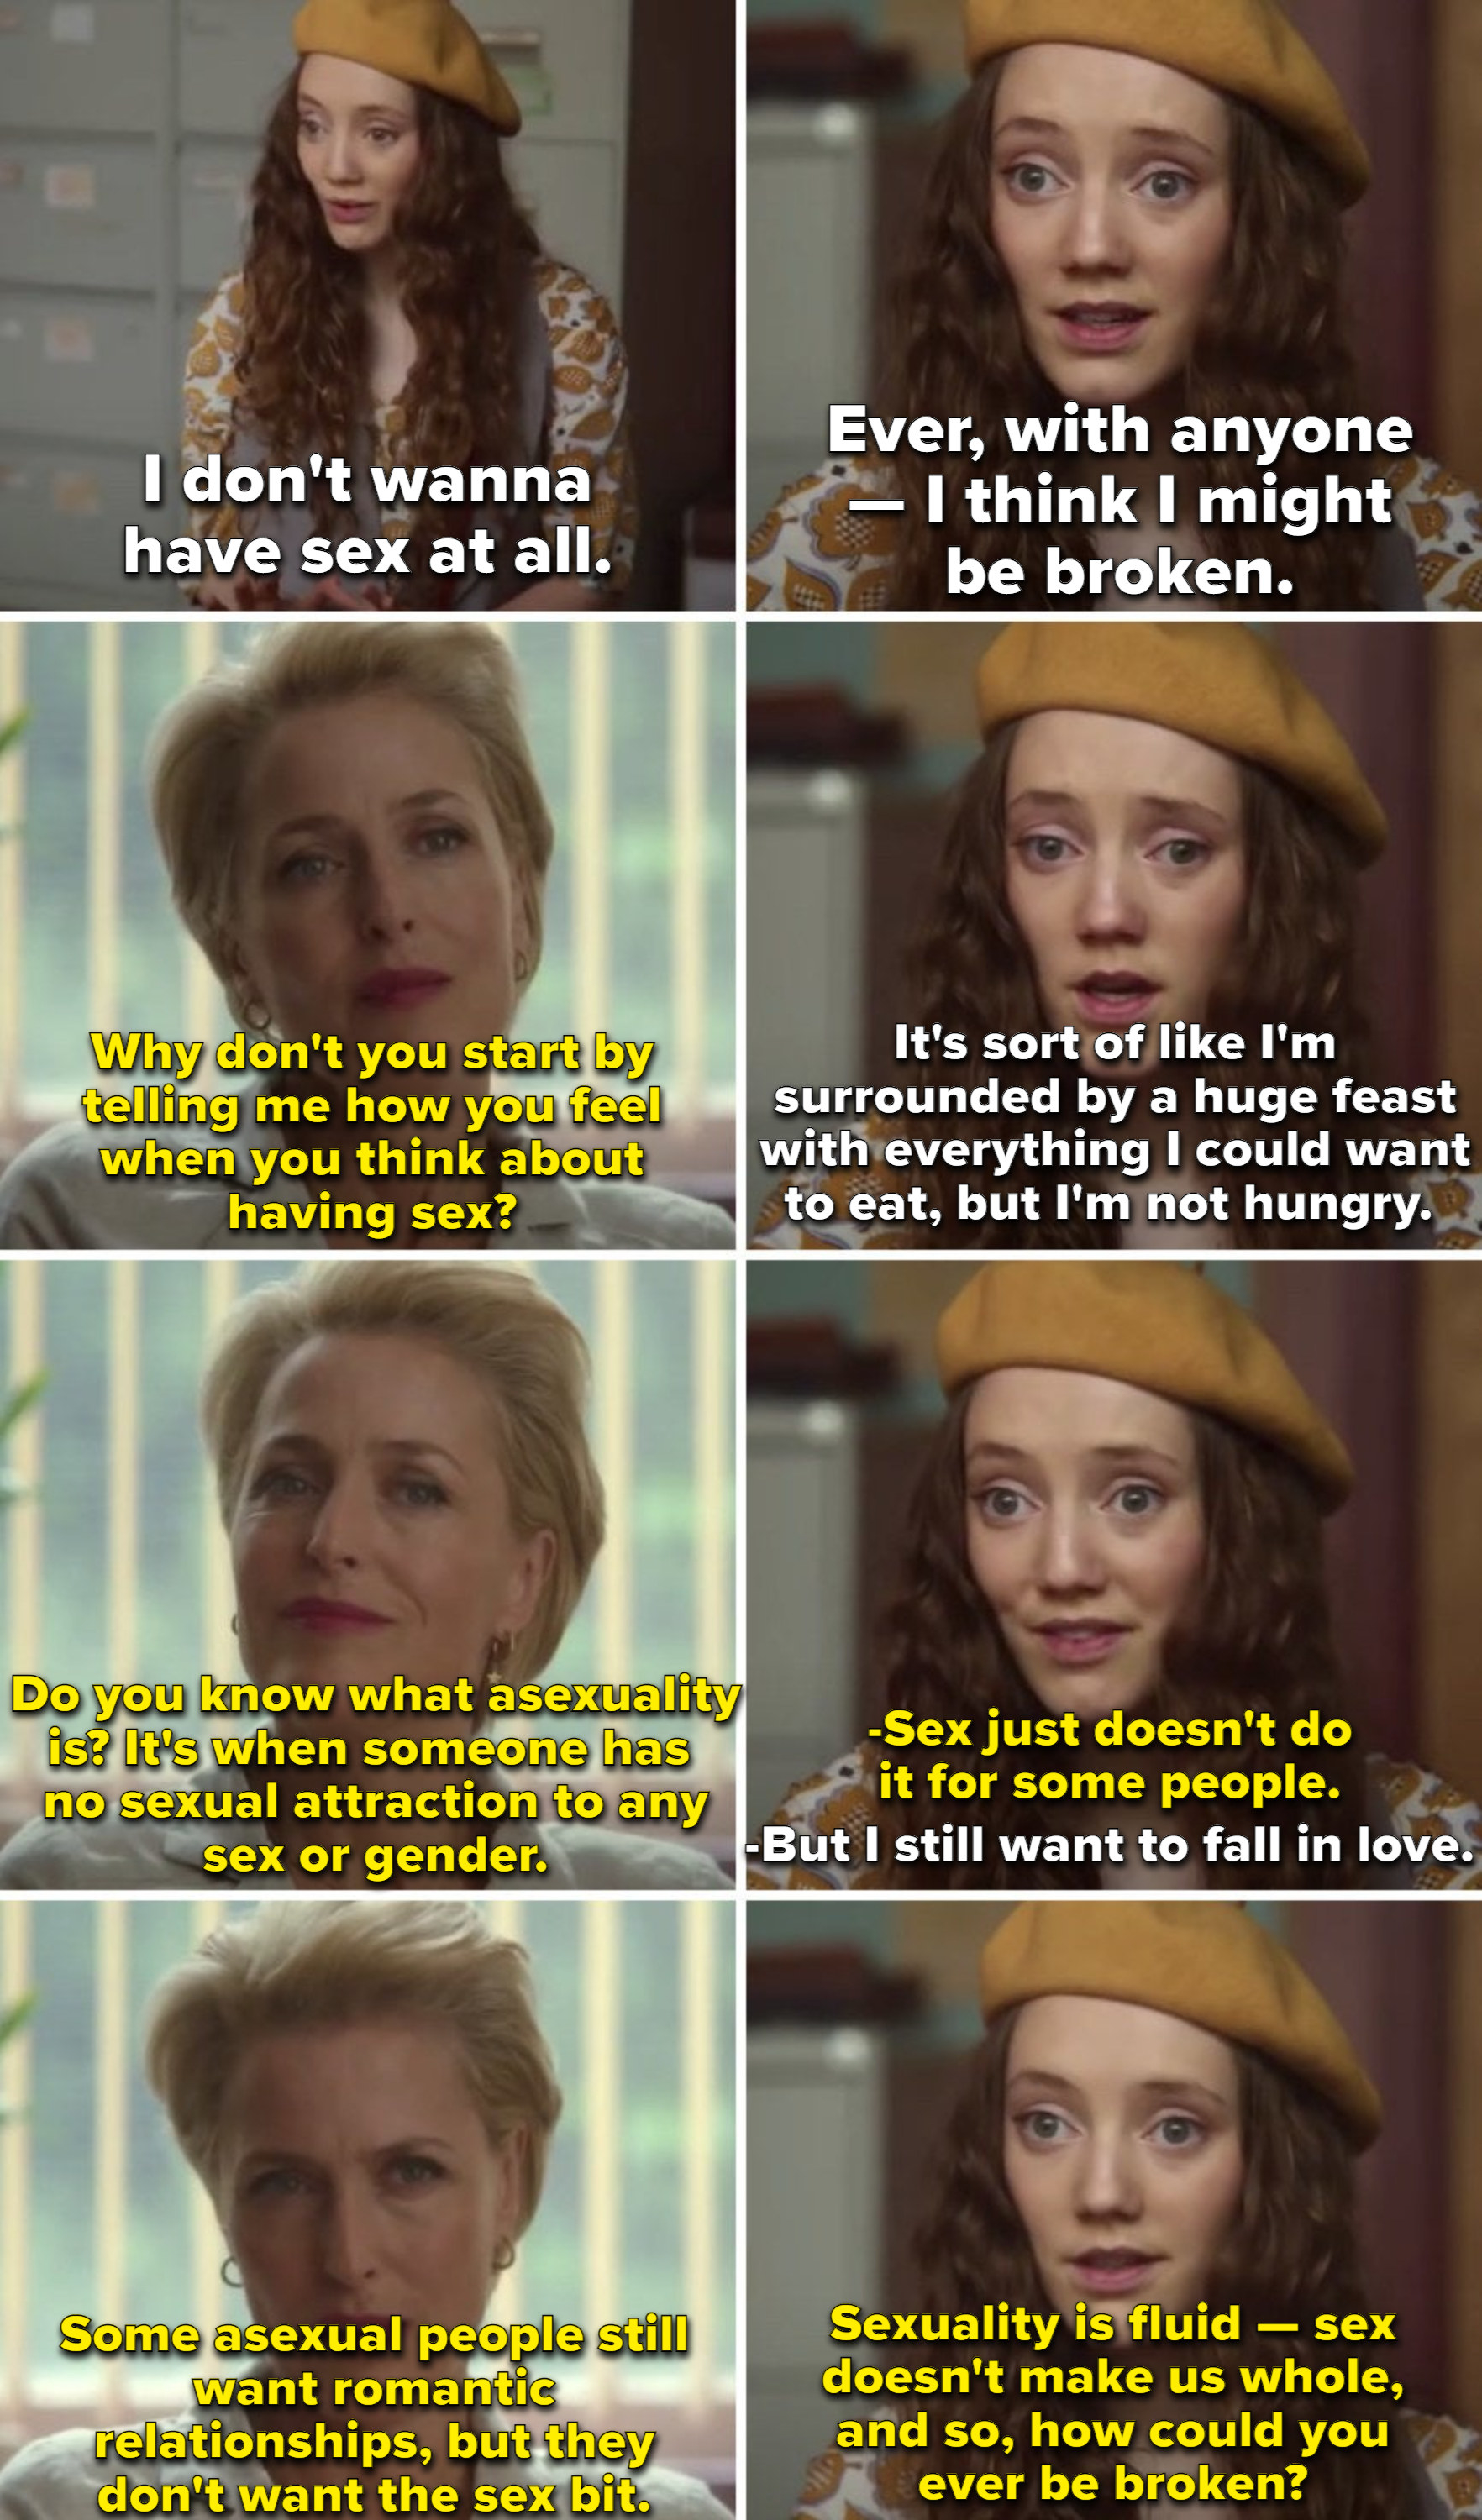 Jean explaining to Florence the definition of asexuality, saying: &quot;Sexuality is fluid — sex doesn&#x27;t make us whole, and so, how could you ever be broken?&quot;